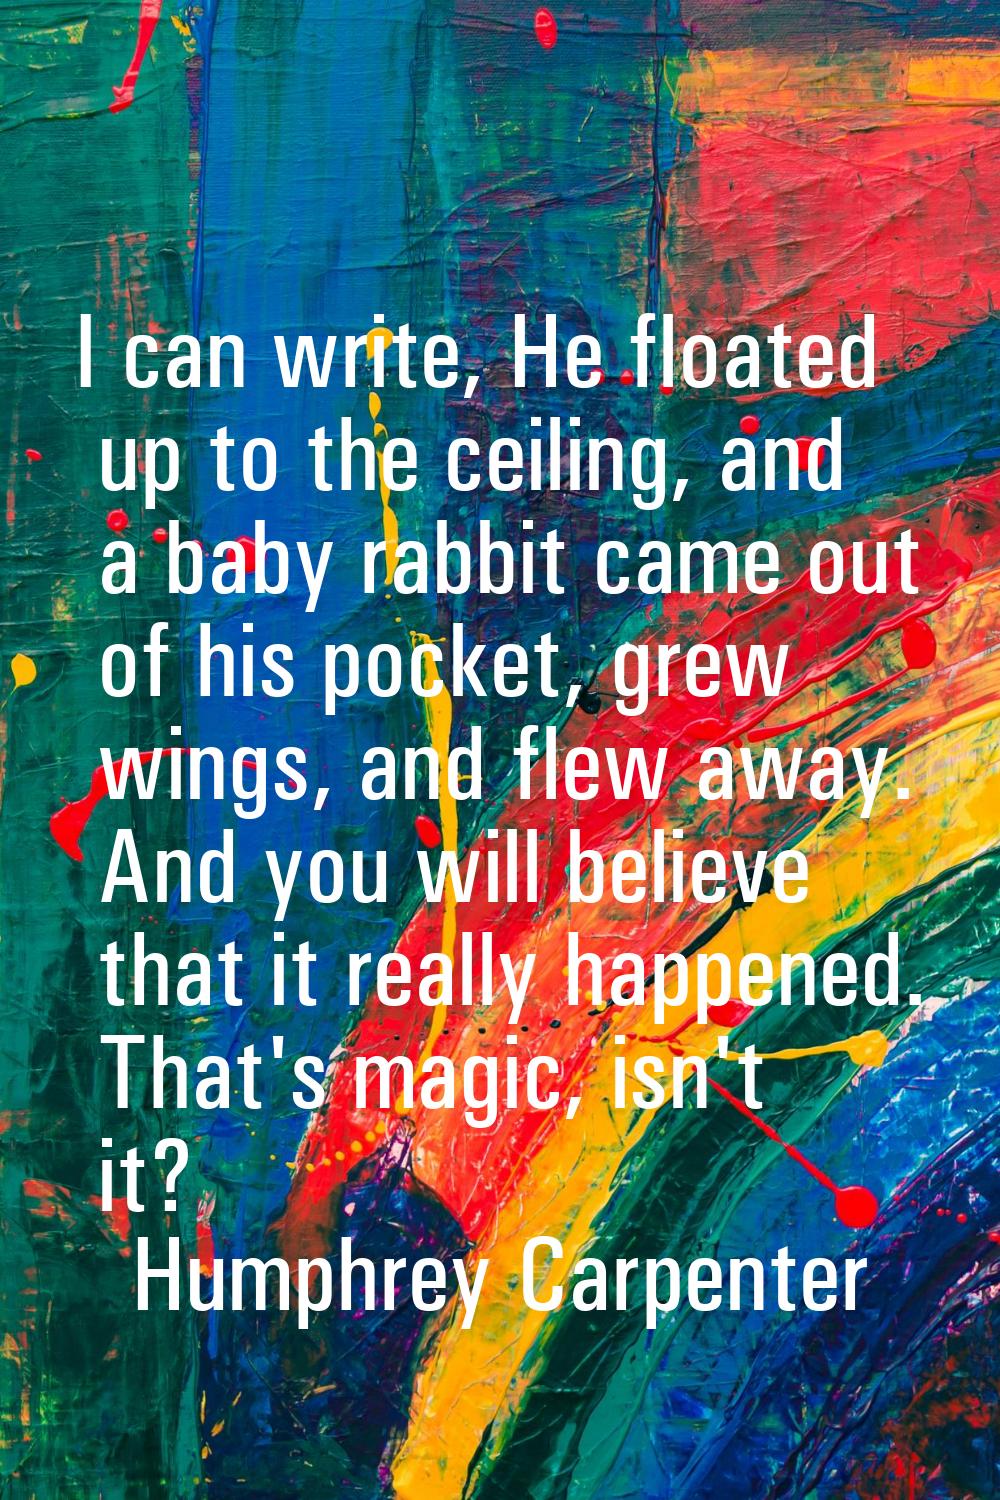 I can write, He floated up to the ceiling, and a baby rabbit came out of his pocket, grew wings, an